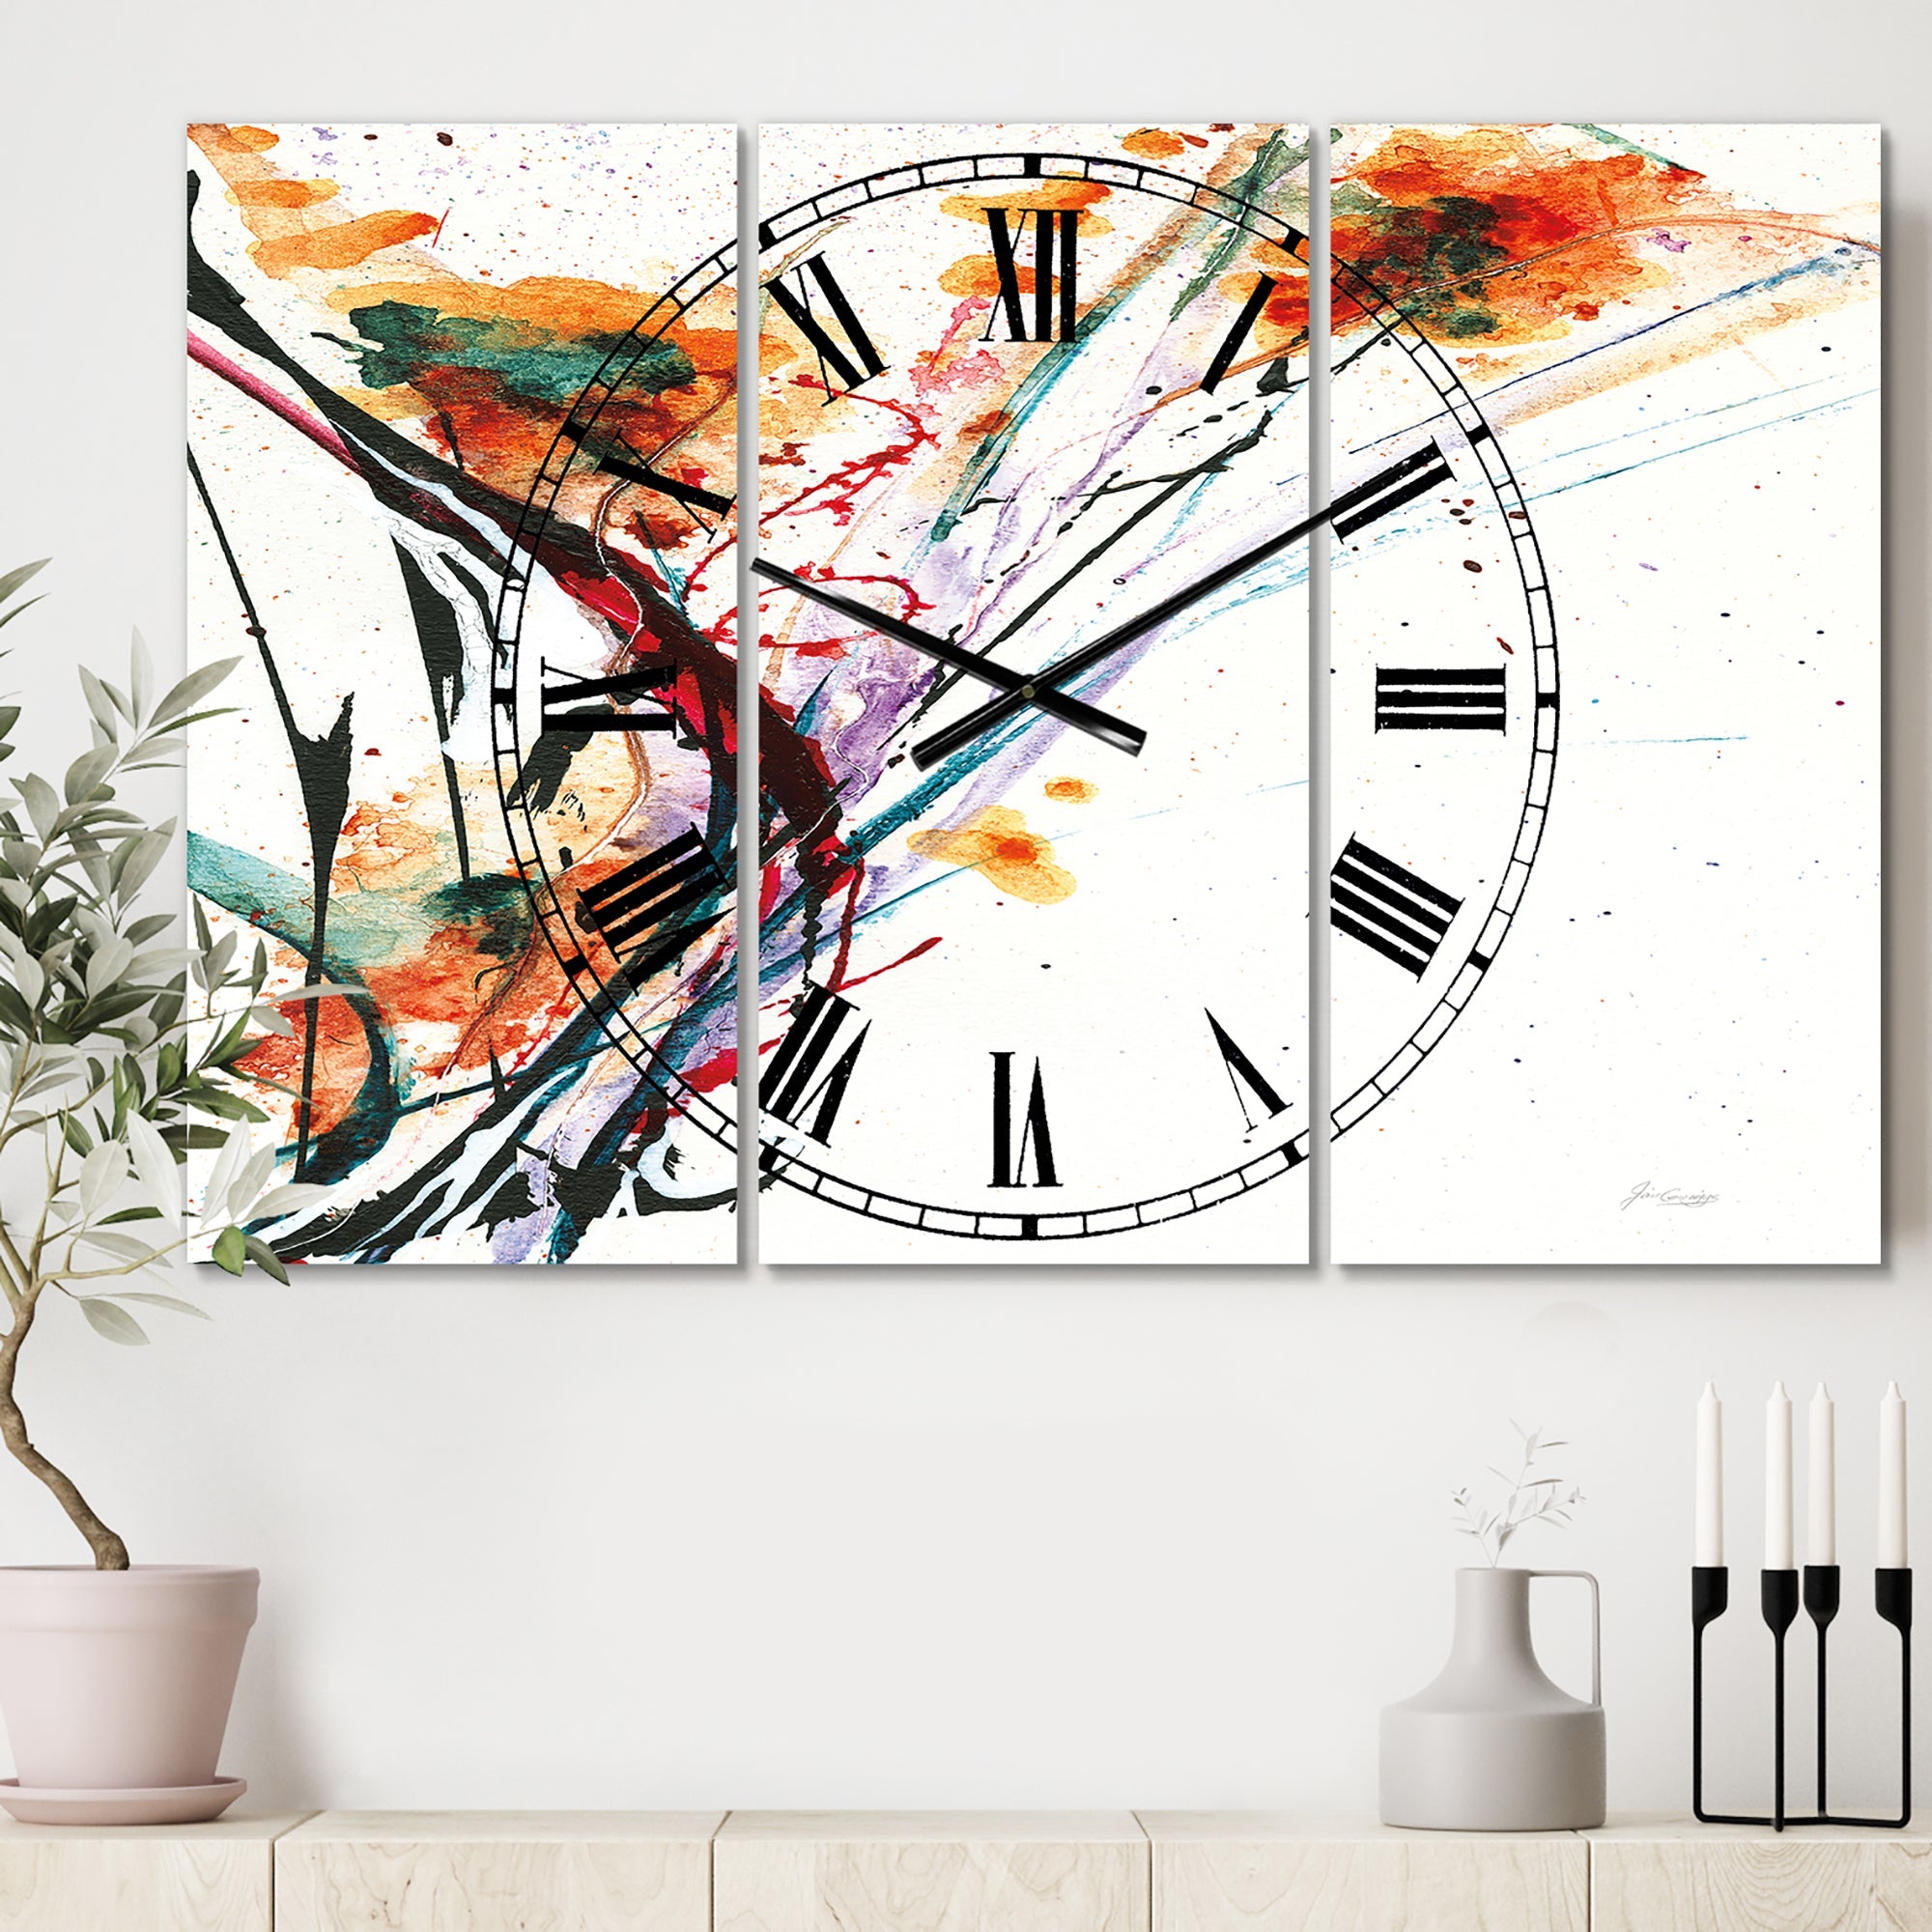 Abstract Orange Flowers - Cottage 3 Panels Oversized Wall CLock